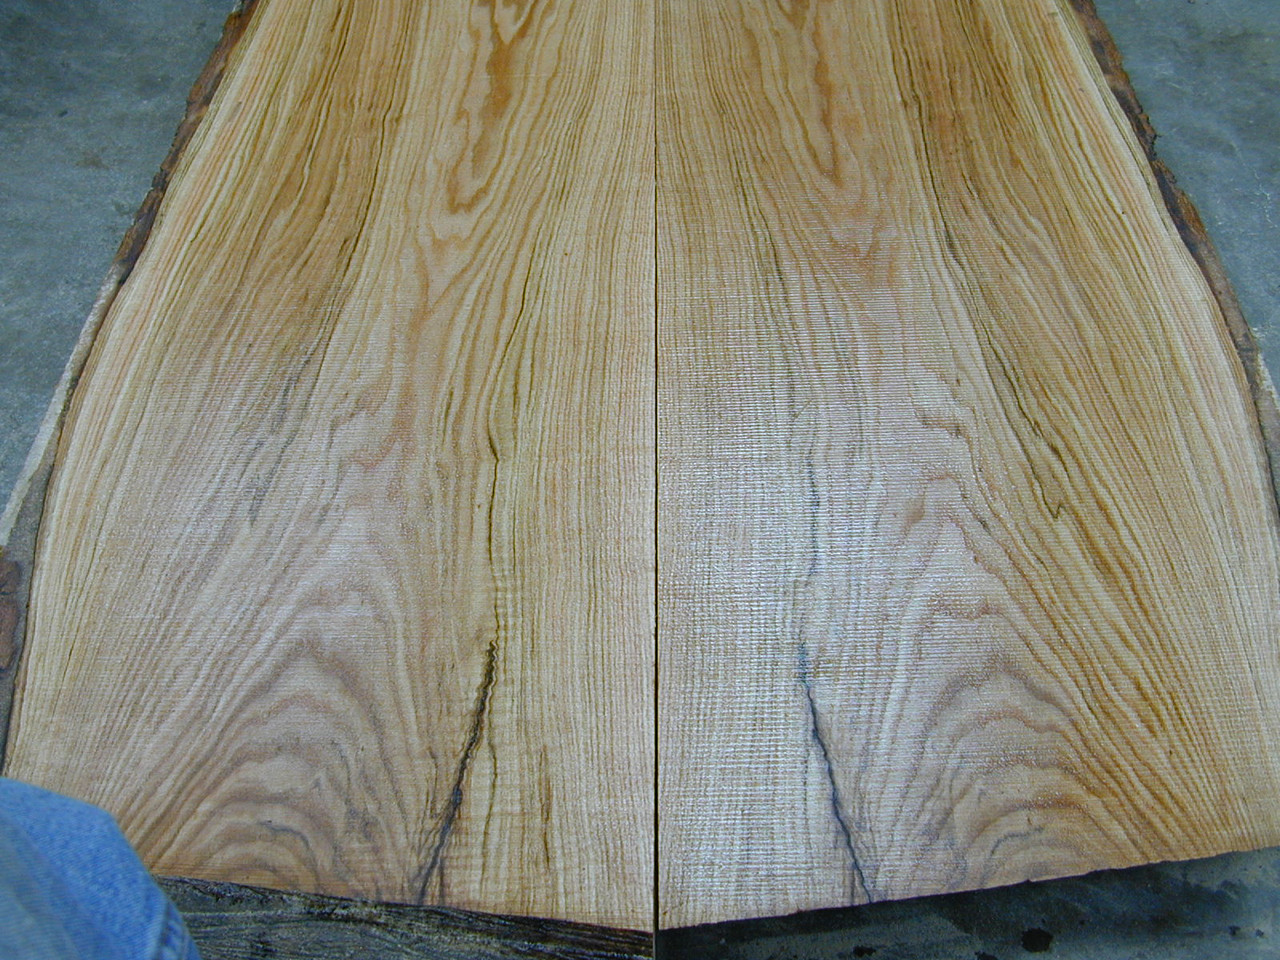 8/4 Bookmatched Red Oak Live Edge Table Top Slabs - 1357 AB